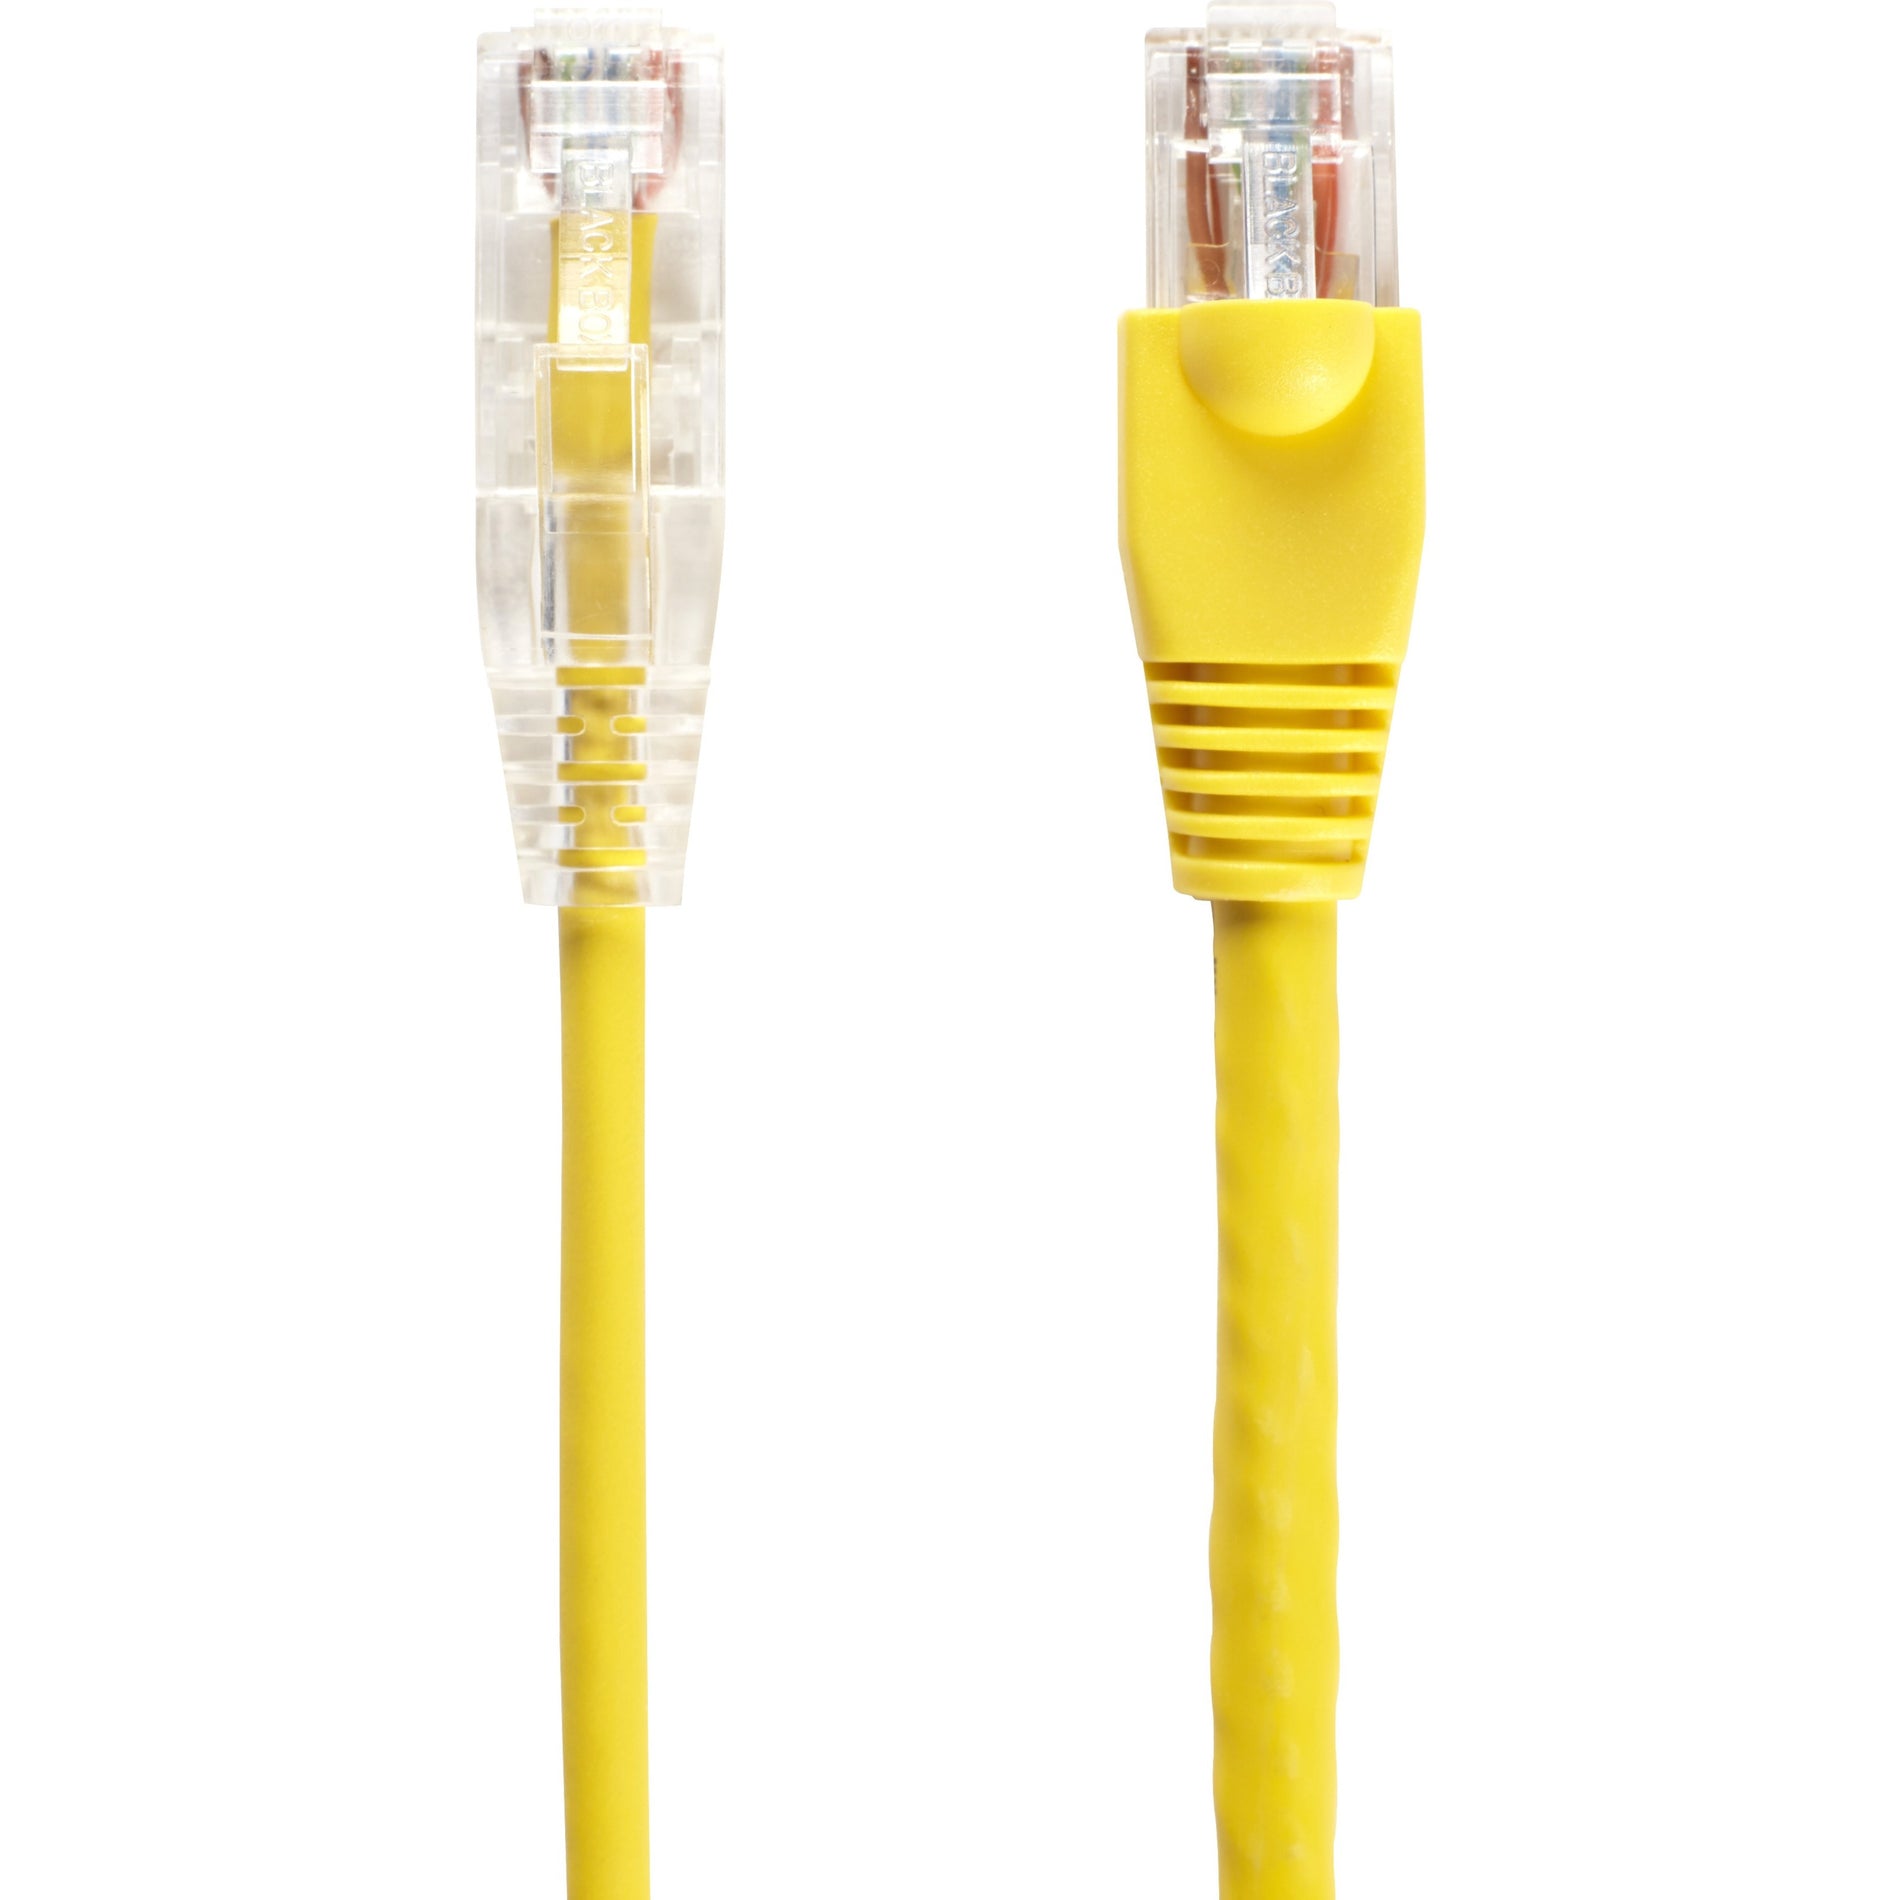 Black Box C6PC28-YL-02 Slim-Net Cat.6 UTP Patch Network Cable, 2 ft, Snagless Boot, 10 Gbit/s Data Transfer Rate, Yellow